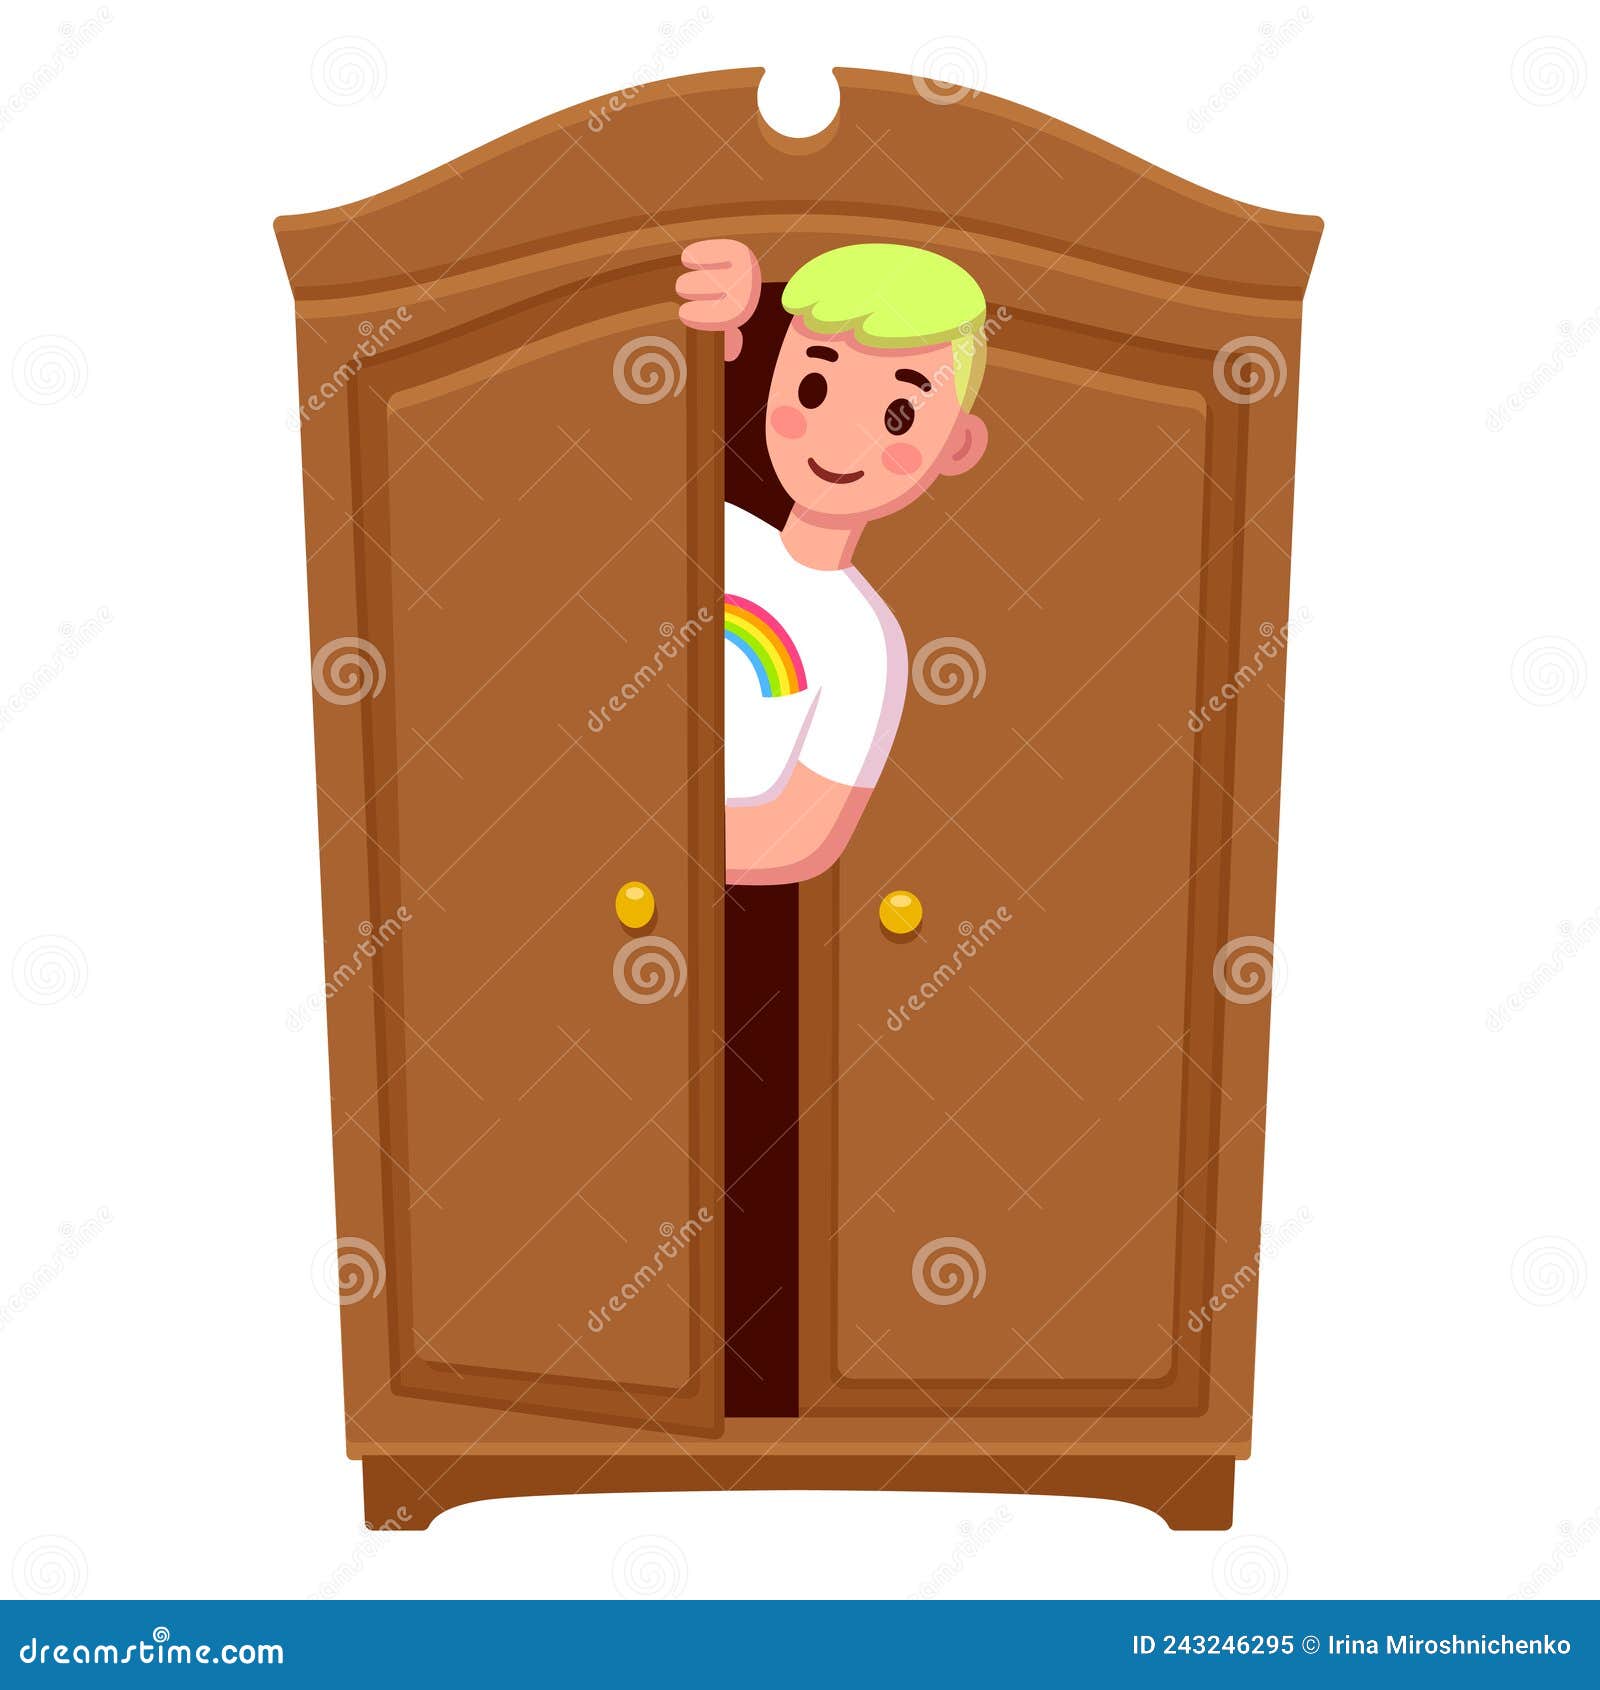 Coming Out Of The Closet Stock Vector Illustration Of Freedom 243246295